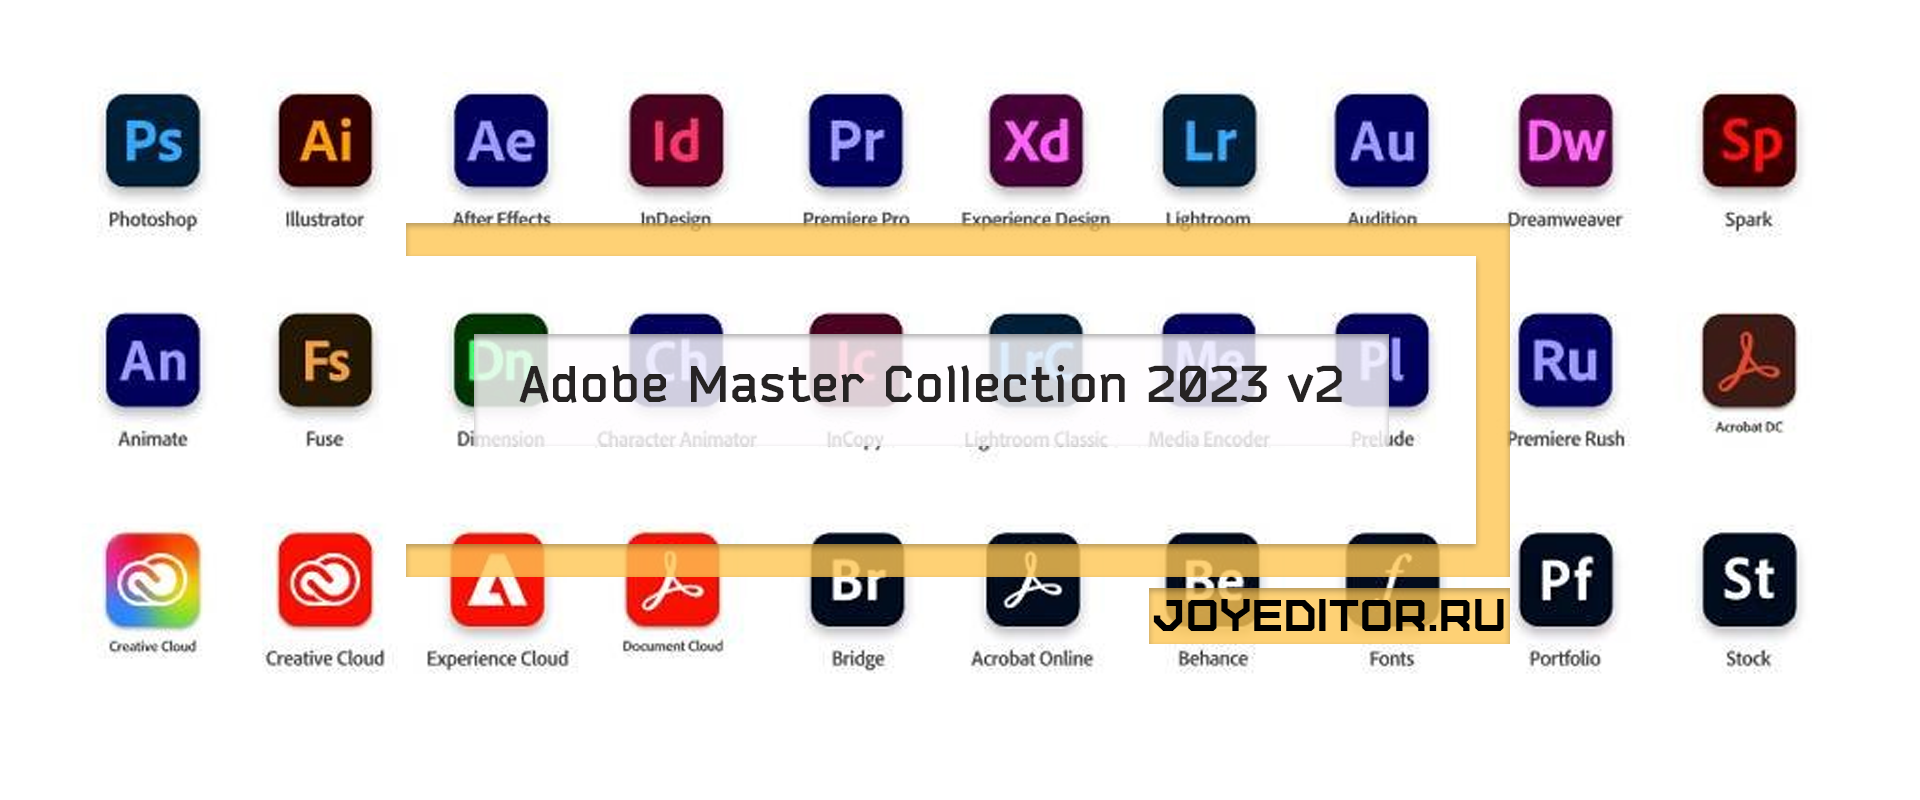 Adobe collection 2023. Adobe Master. Master collection. Adobe Pack 2023.